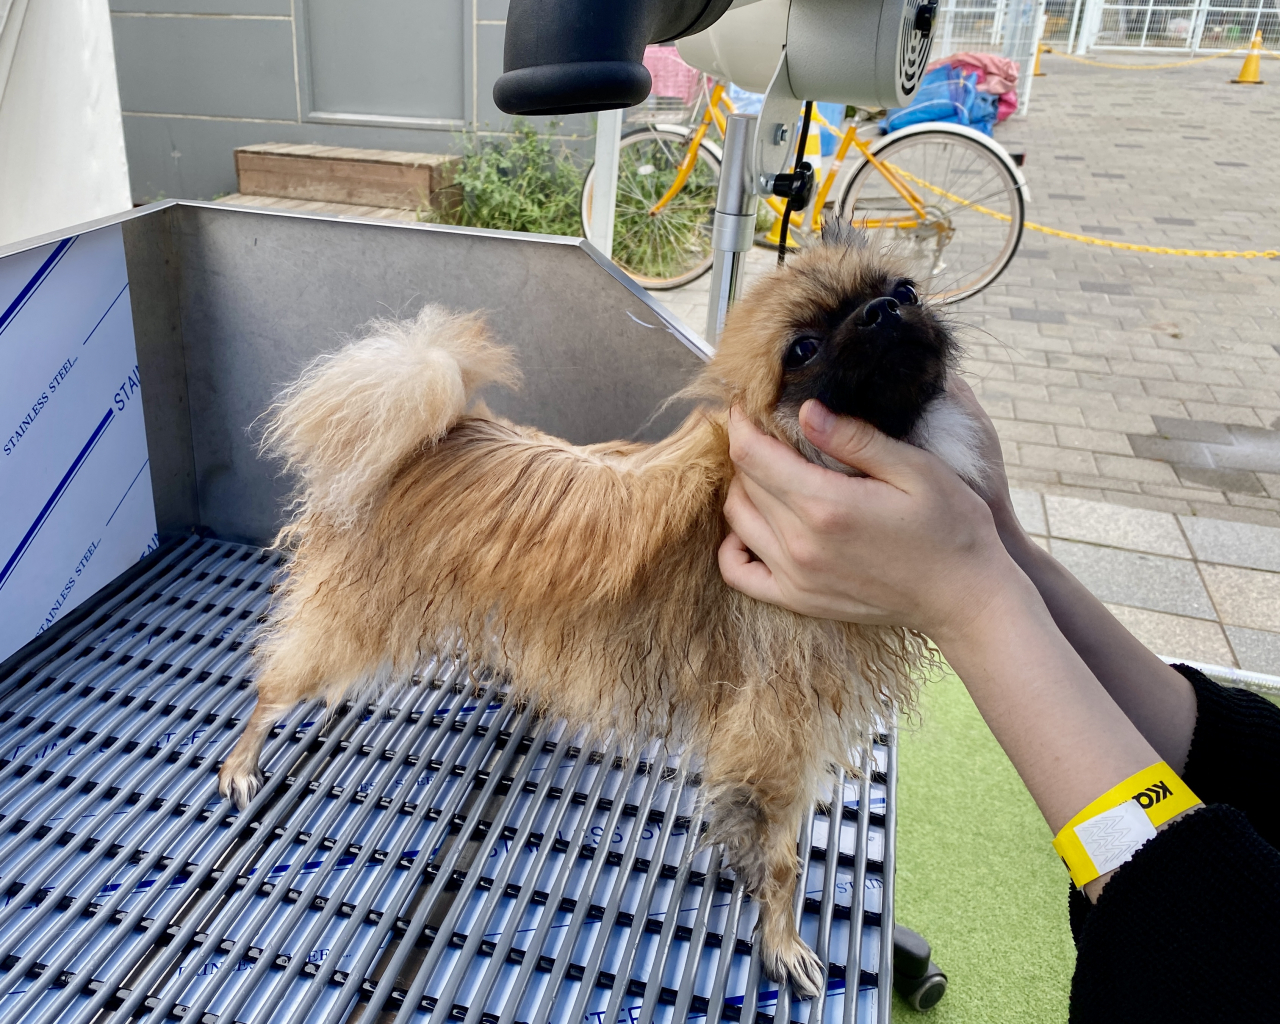 A pet owner dries her puppy with a drying machine. (Hwang Joo-young/The Korea Herald)